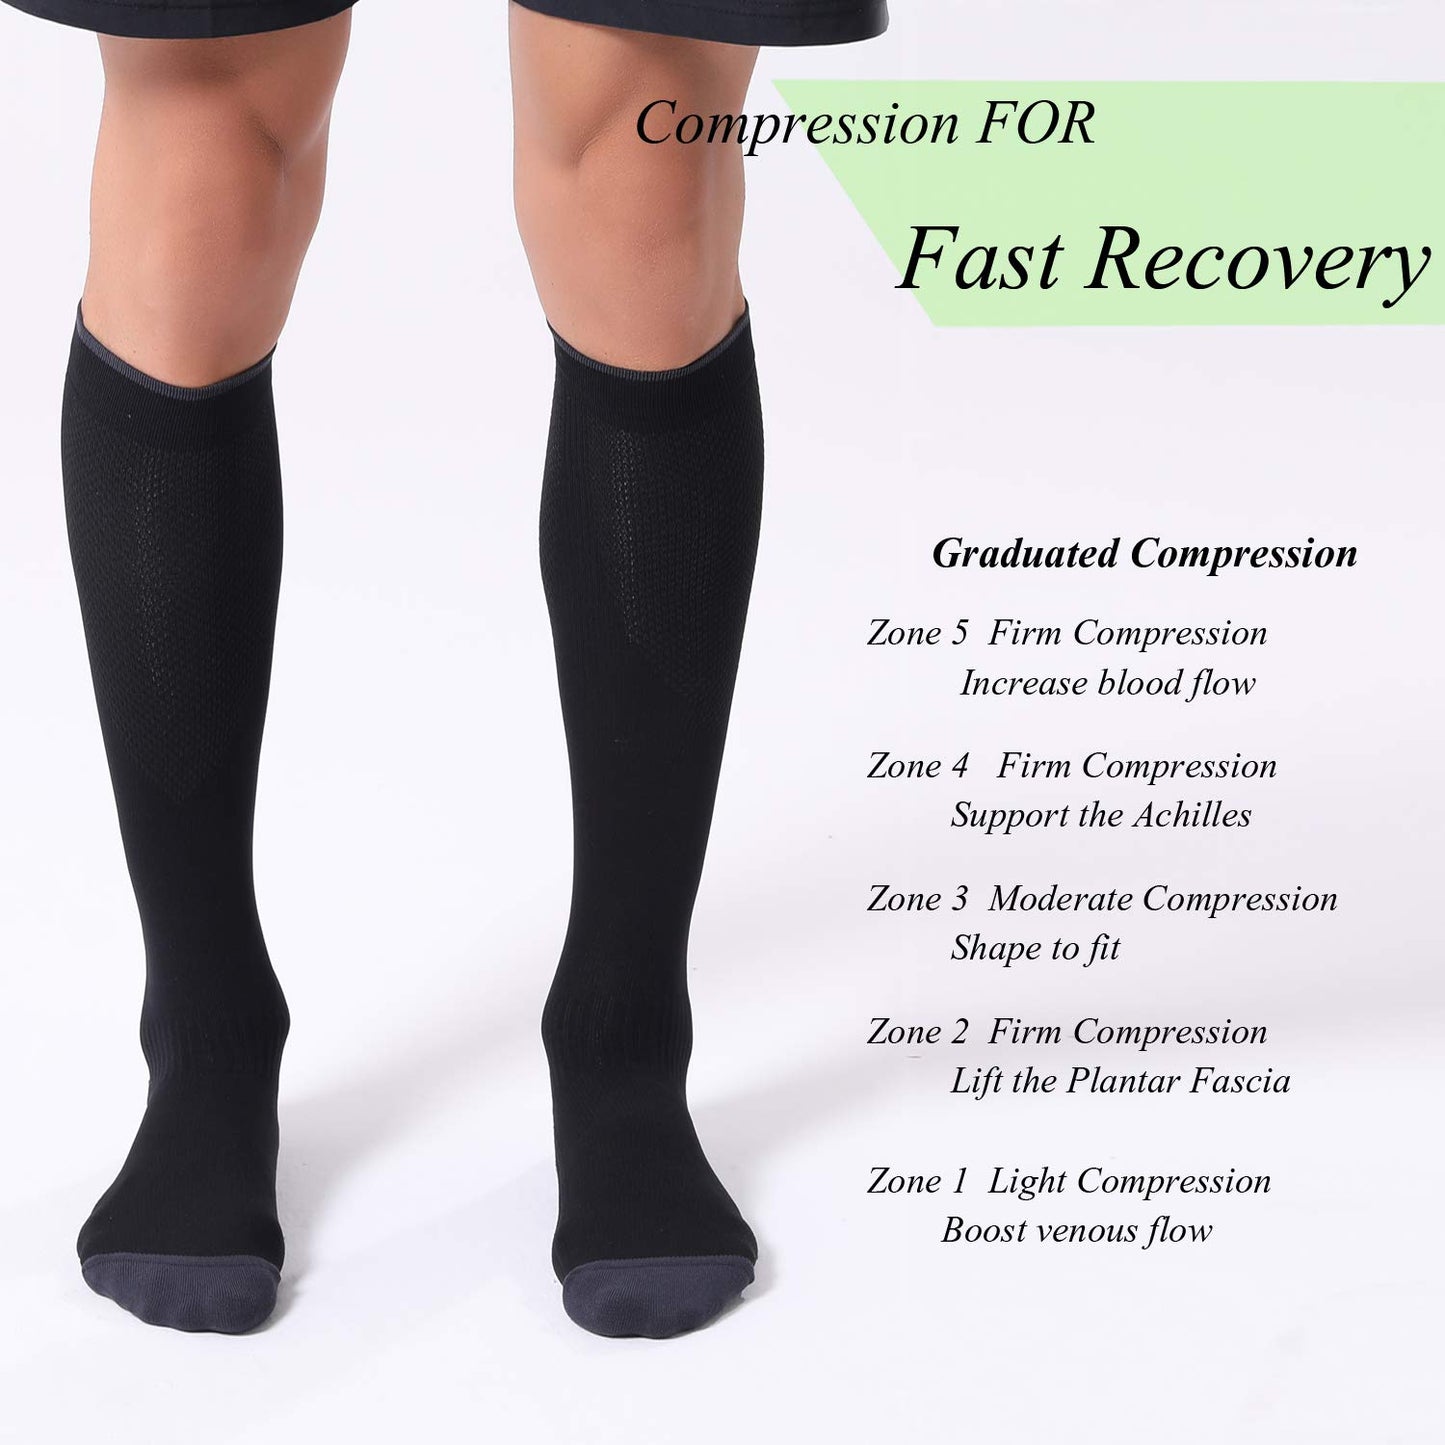 FITRELL 3 Pairs Compression Socks for Women and Men 20-30mmHg- Circulation and Muscle Support Socks for Travel, Running, Nurse, Medical, BLACK S/M